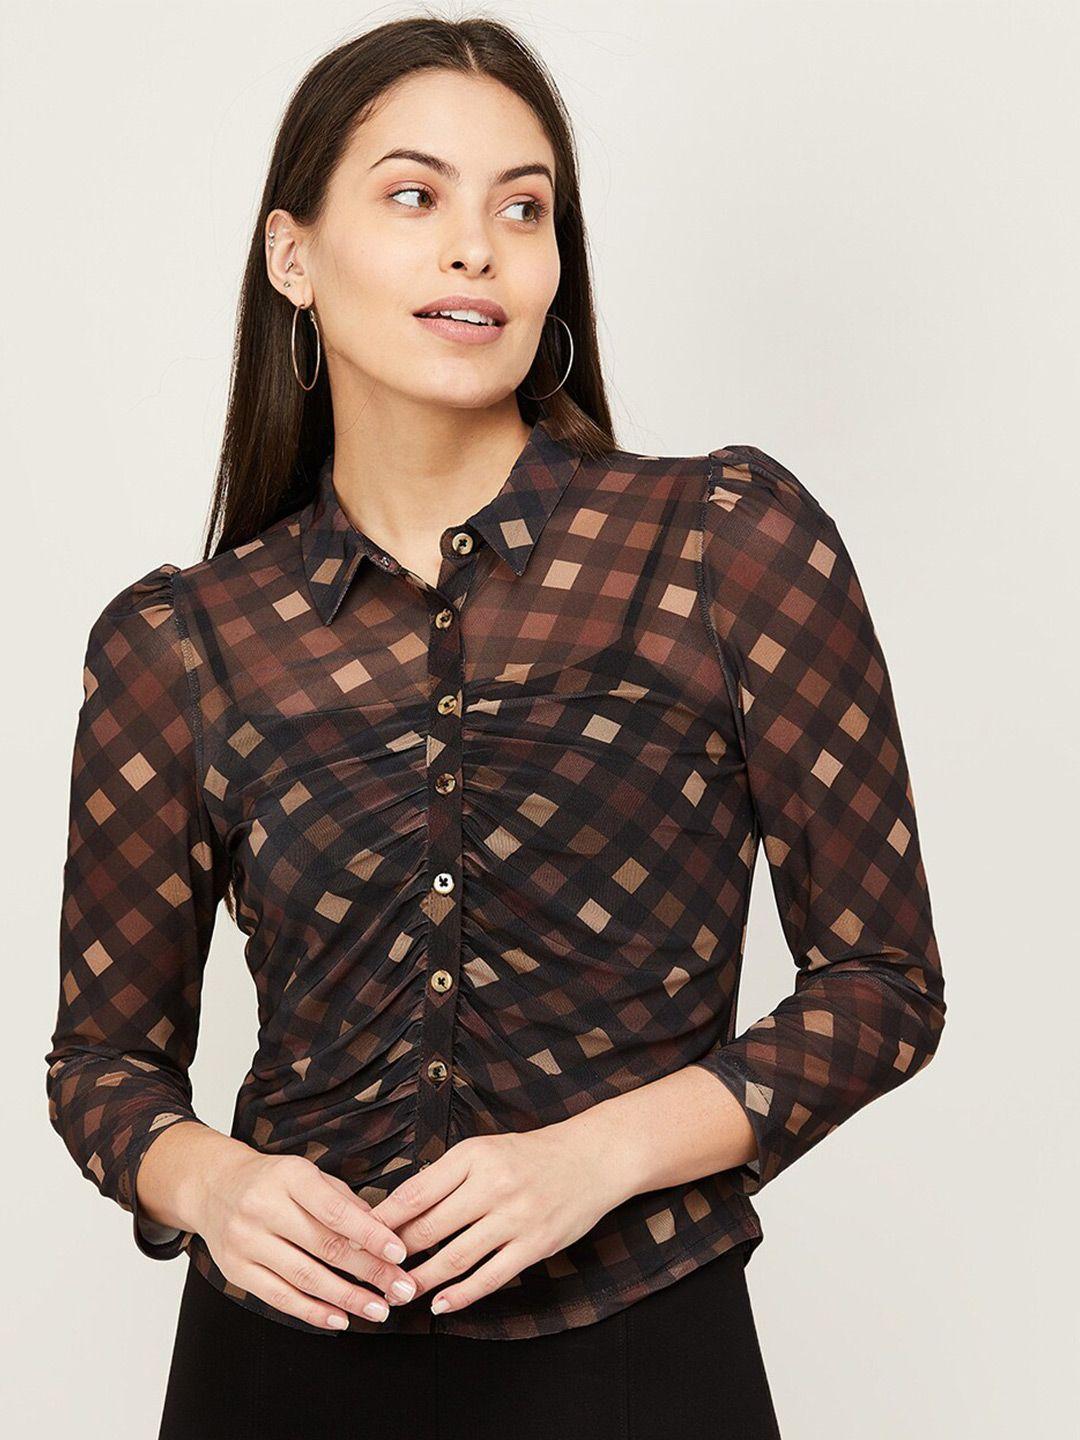 code by lifestyle brown geometric print shirt style top